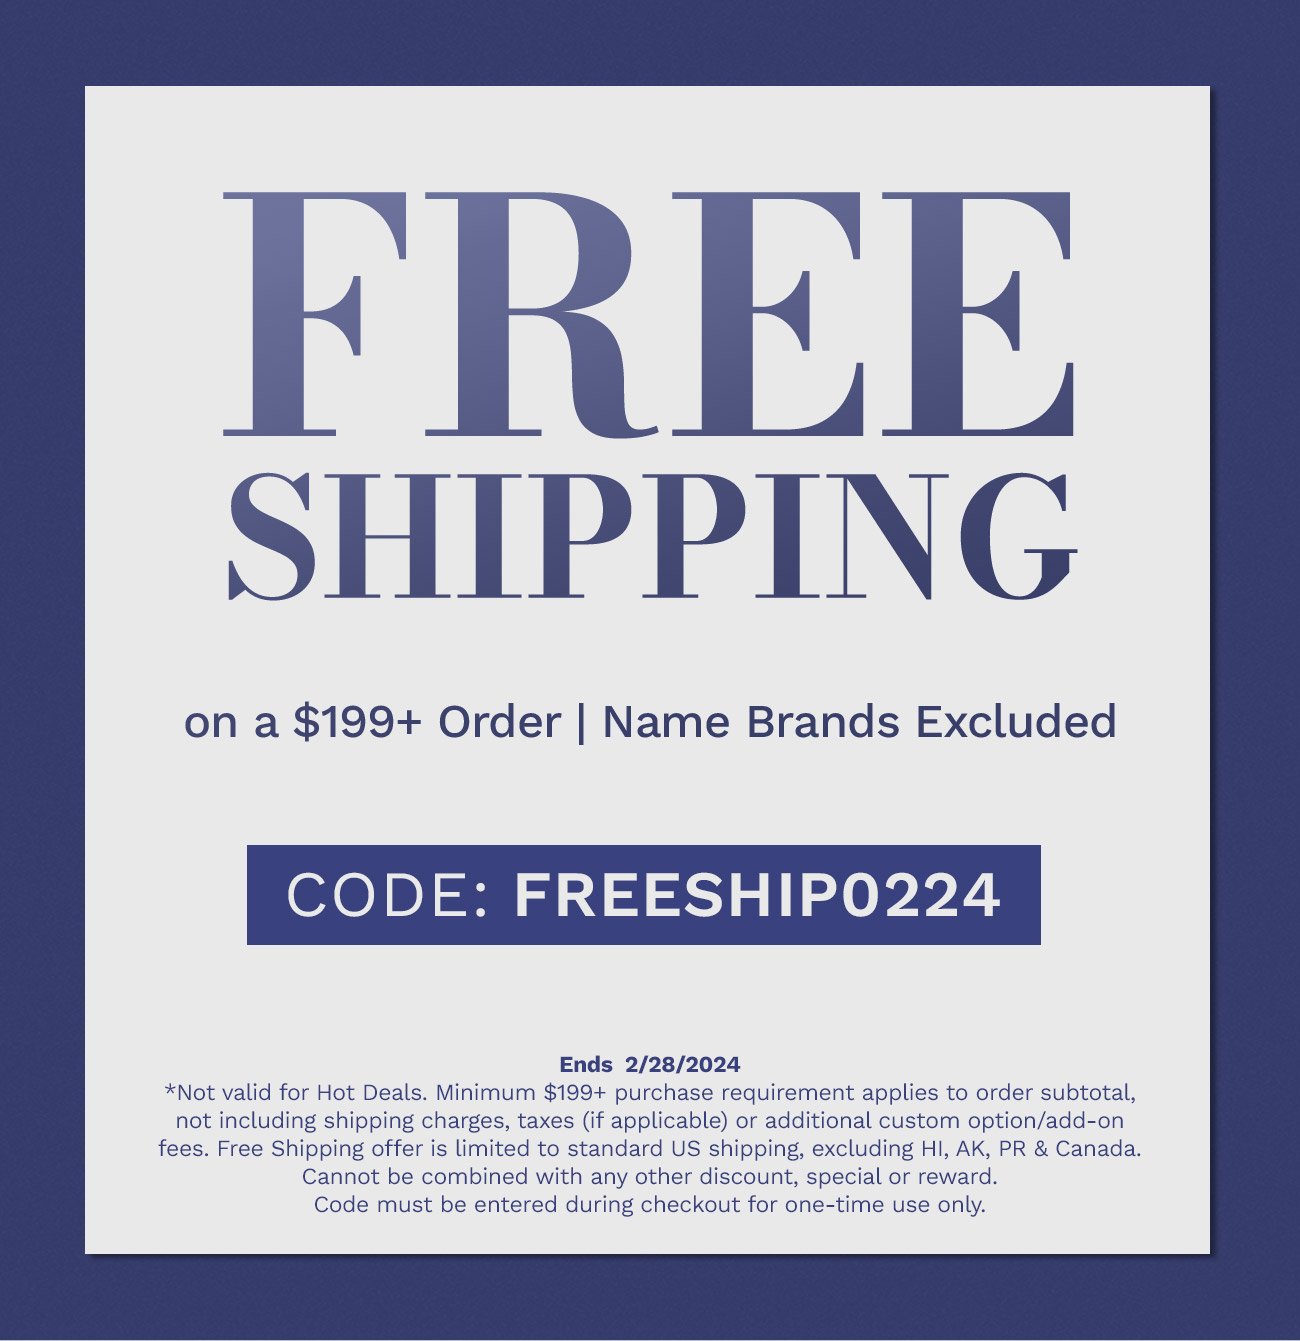 Free Shipping on a \\$199+ Order | Name Brands Excluded. Code: FREESHIP0224. Ends 2/28/2024.